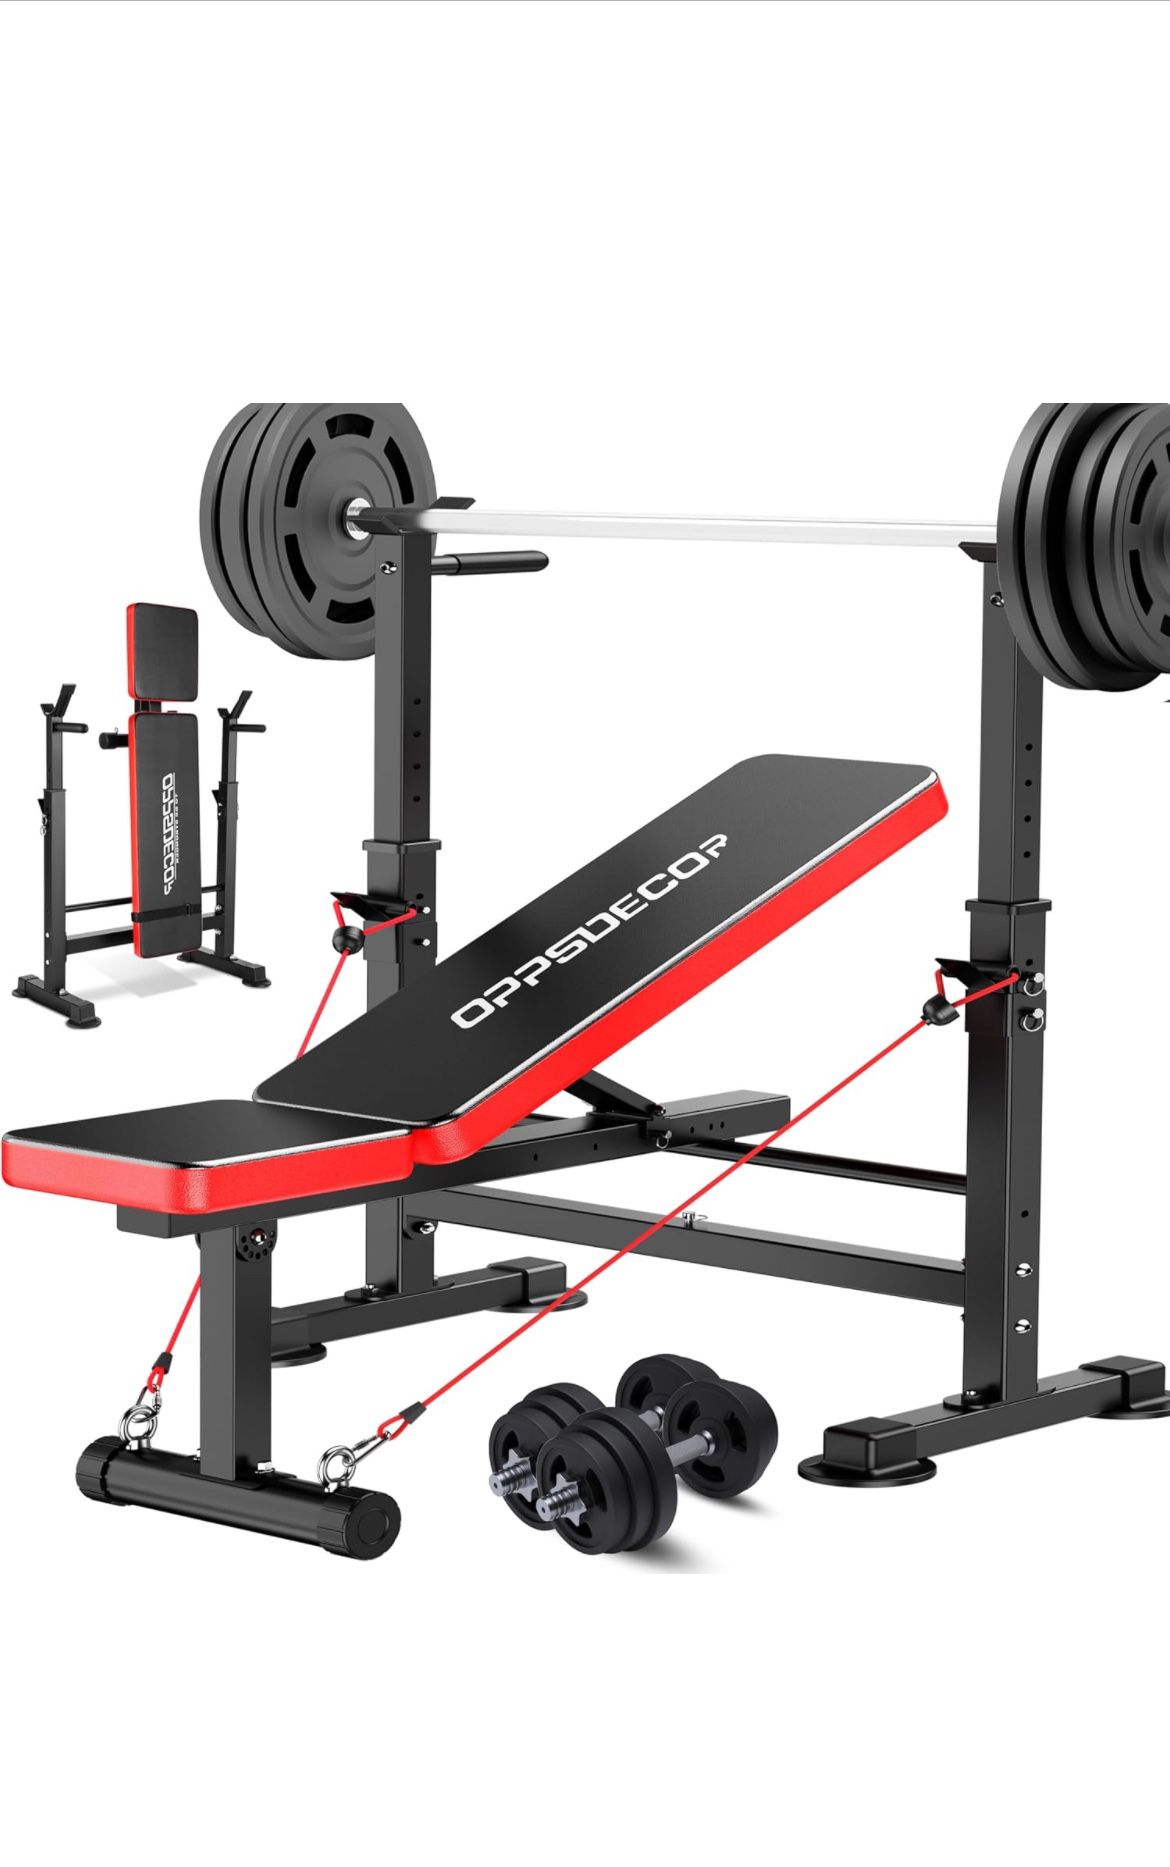 6 in 1 Weight Bench Set with Squat Rack Adjustable Workout Bench